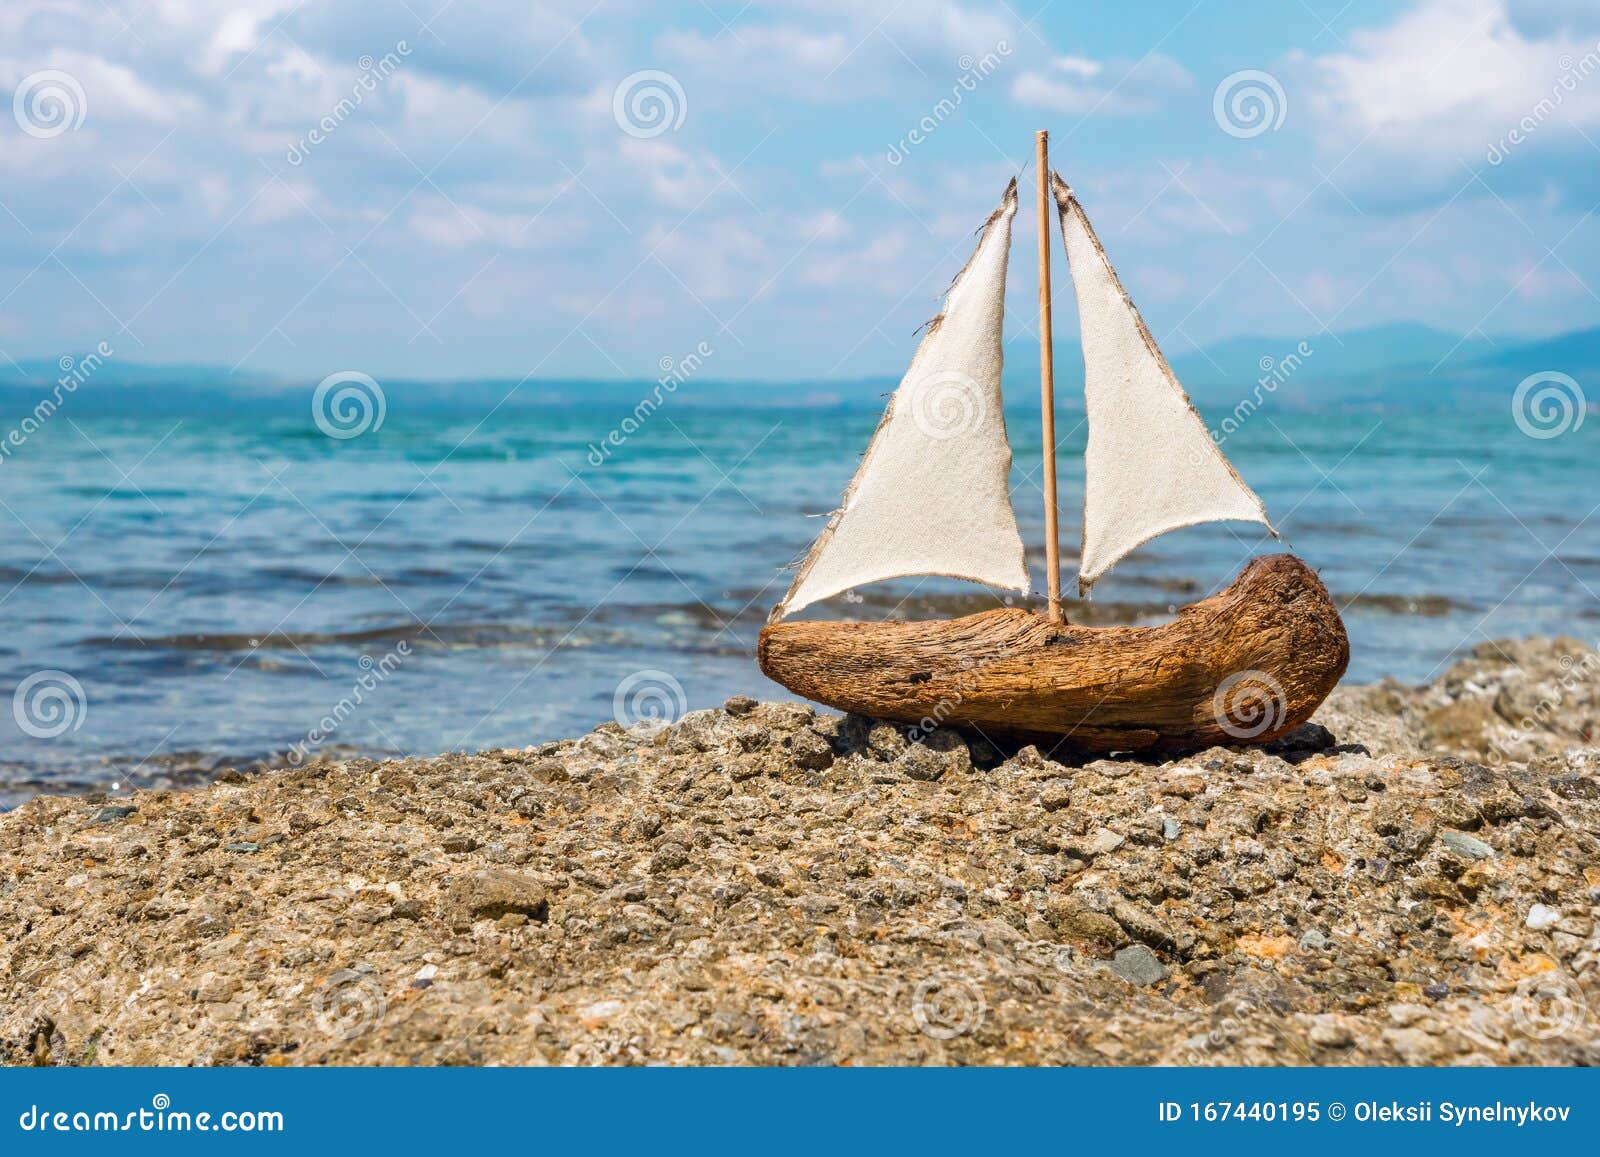 toy boat in the sea waves. travel concept. sailer on beautiful seascape background. water sports concept. fascinating